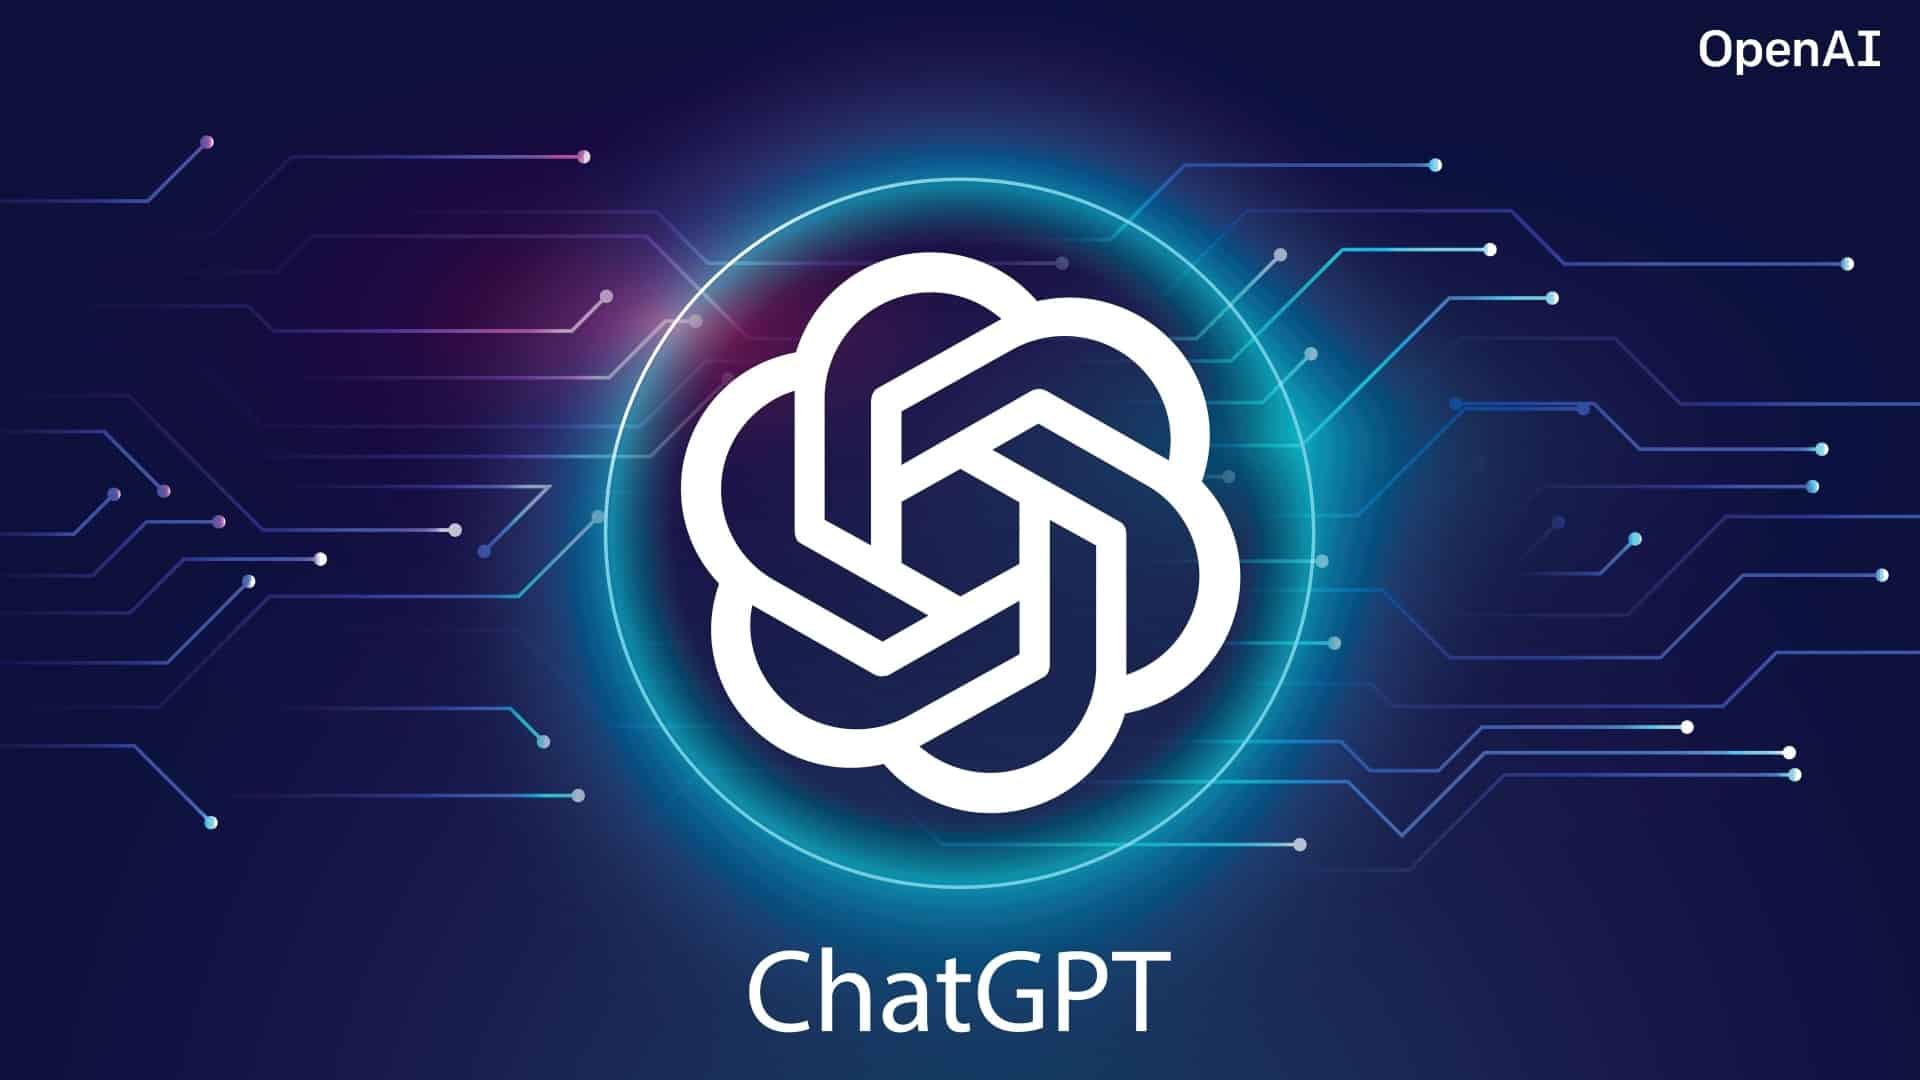 “The Rise of ChatGPT: A New Era in Natural Language Processing”